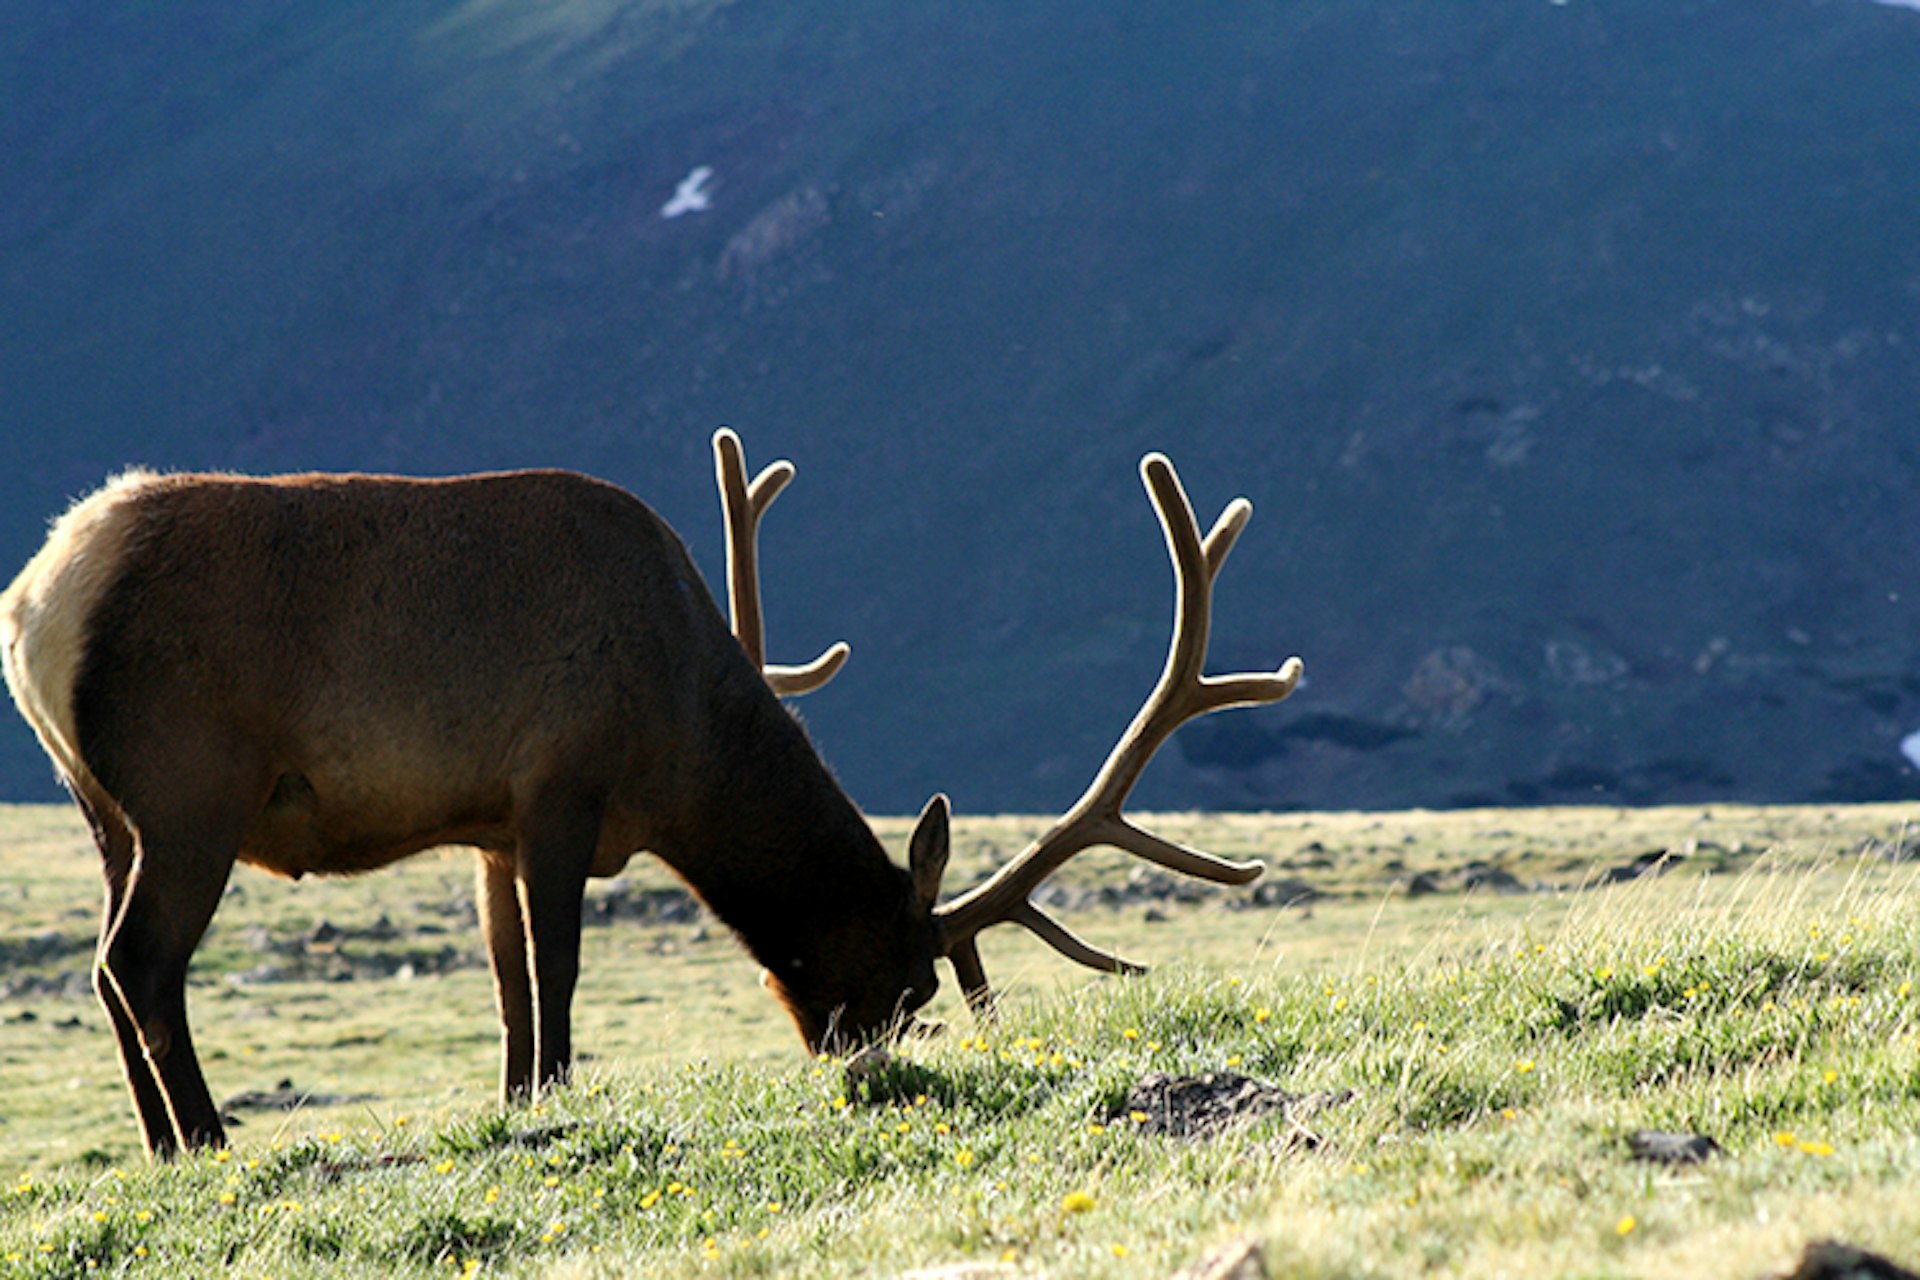 Efforts to increase the population of North American Elk in Rocky Mountain National Park have been successful – the park's herd now numbers between 600 and 800. Image by Warren Brown / CC BY 2.0